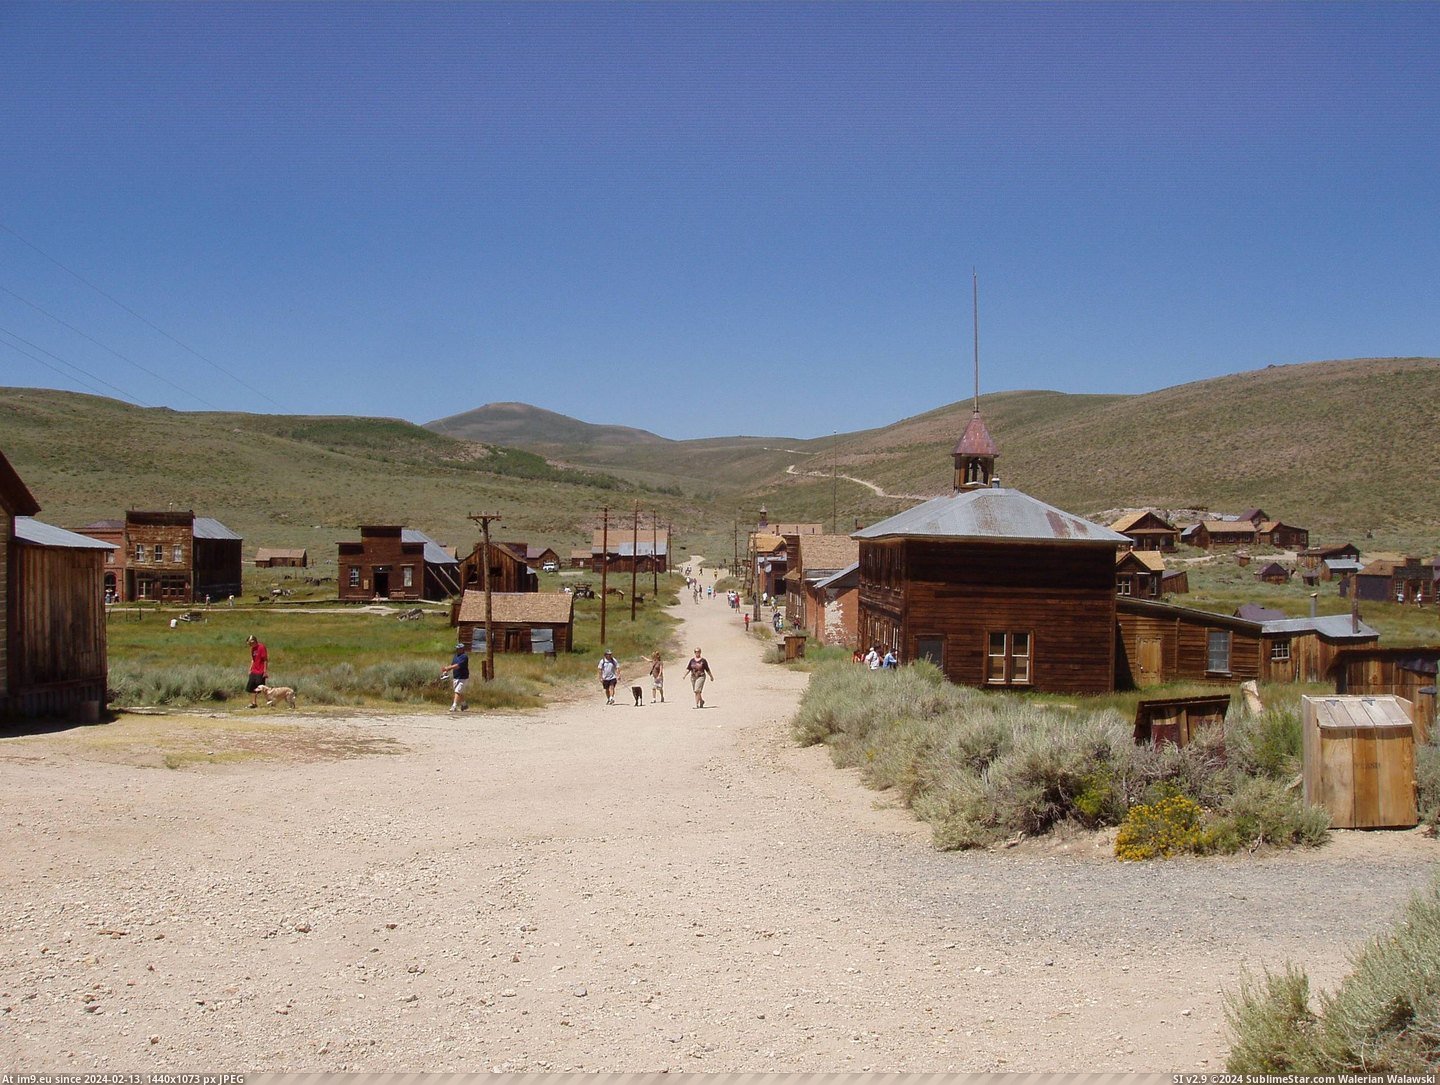 #Bodie  #Aug Bodie 6 Aug. 2006 Pic. (Image of album Bodie - a ghost town in Eastern California))